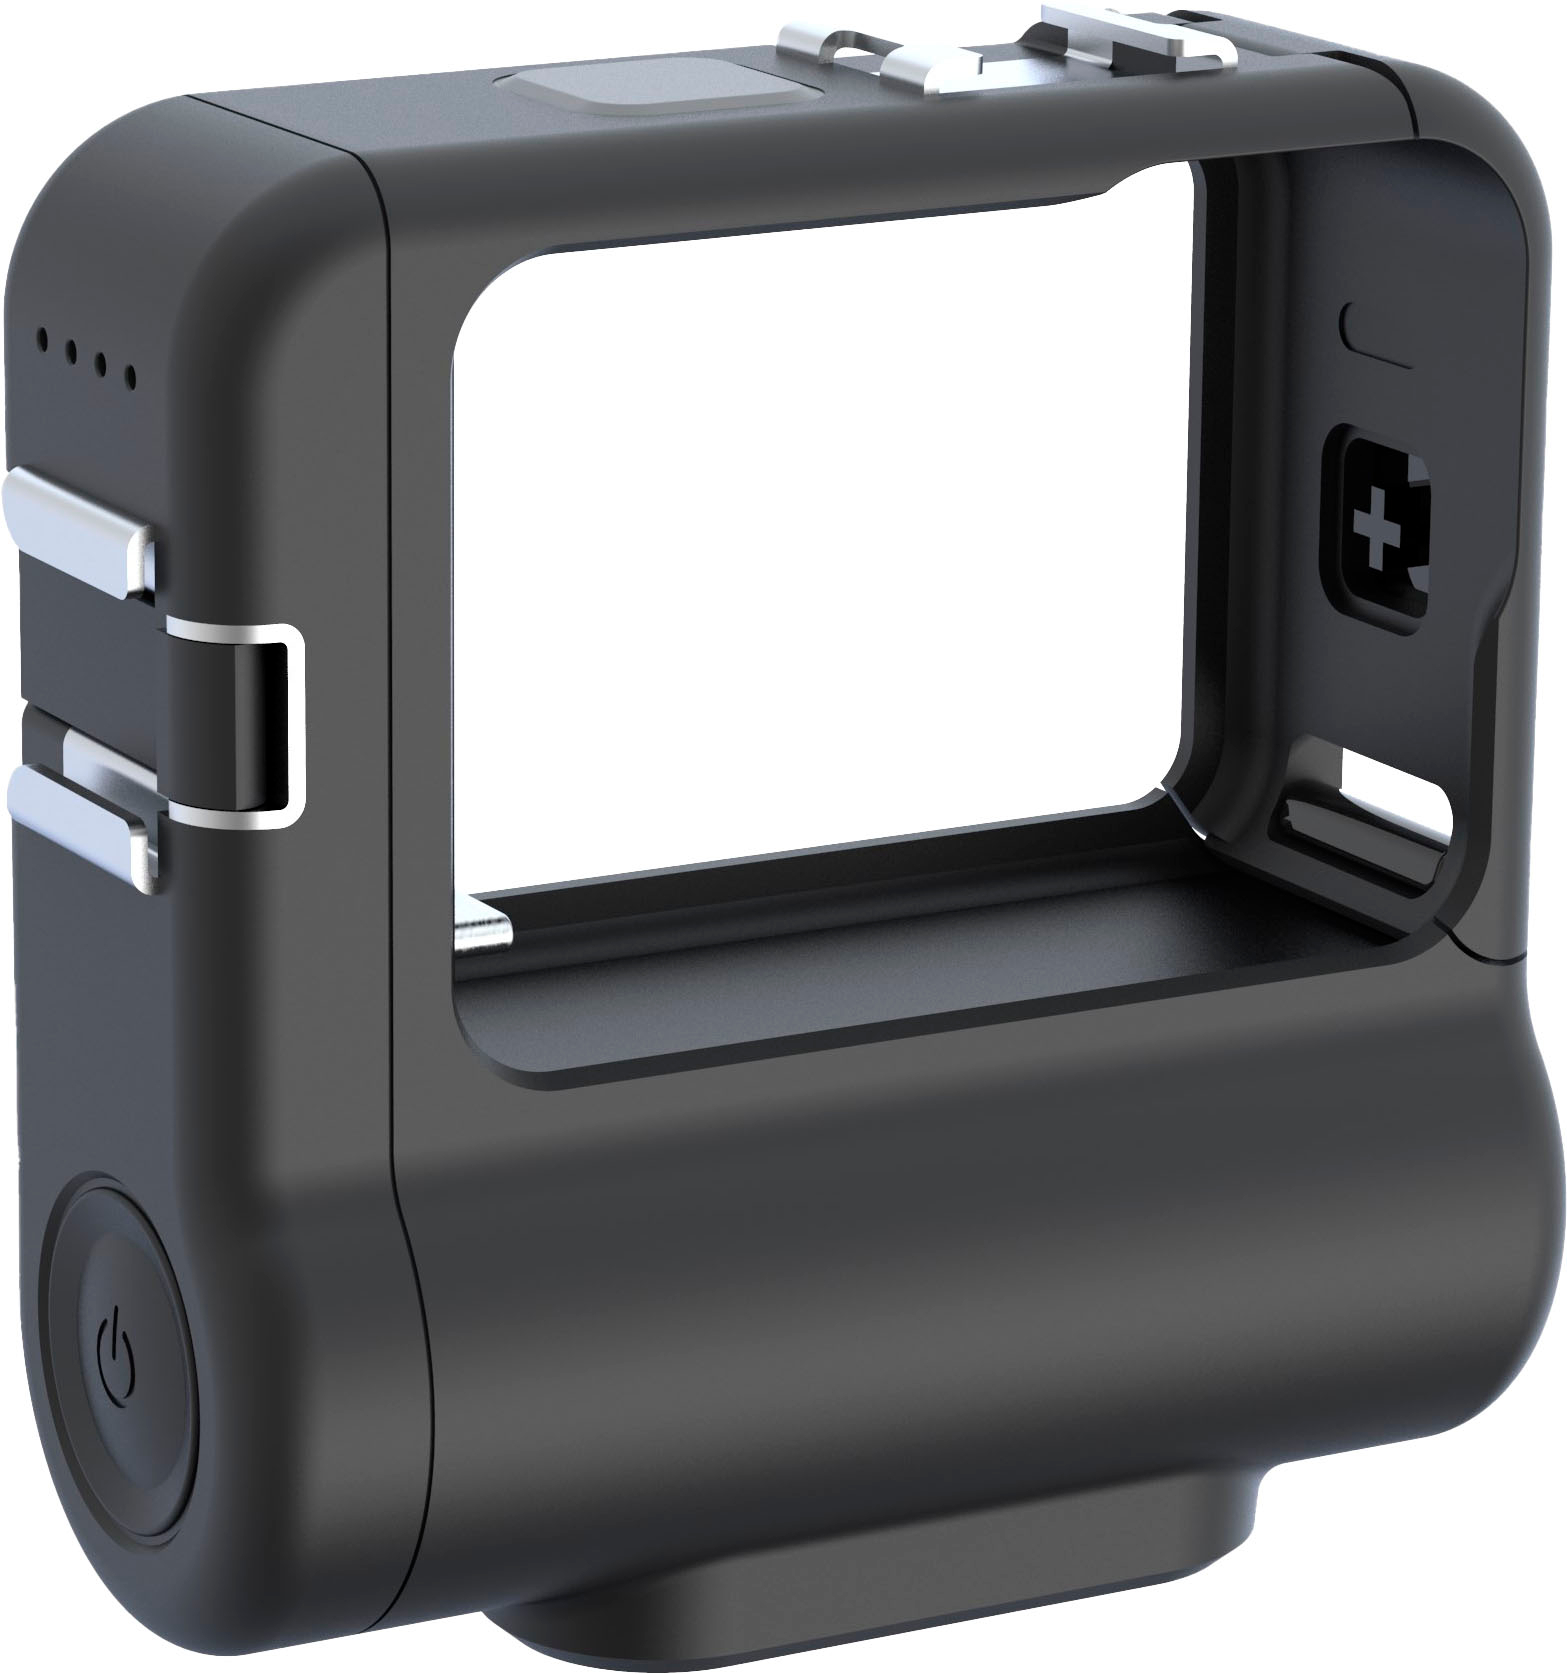 CHARGEUR GOPRO DOUBLE HERO 9/10 + 1 batterie